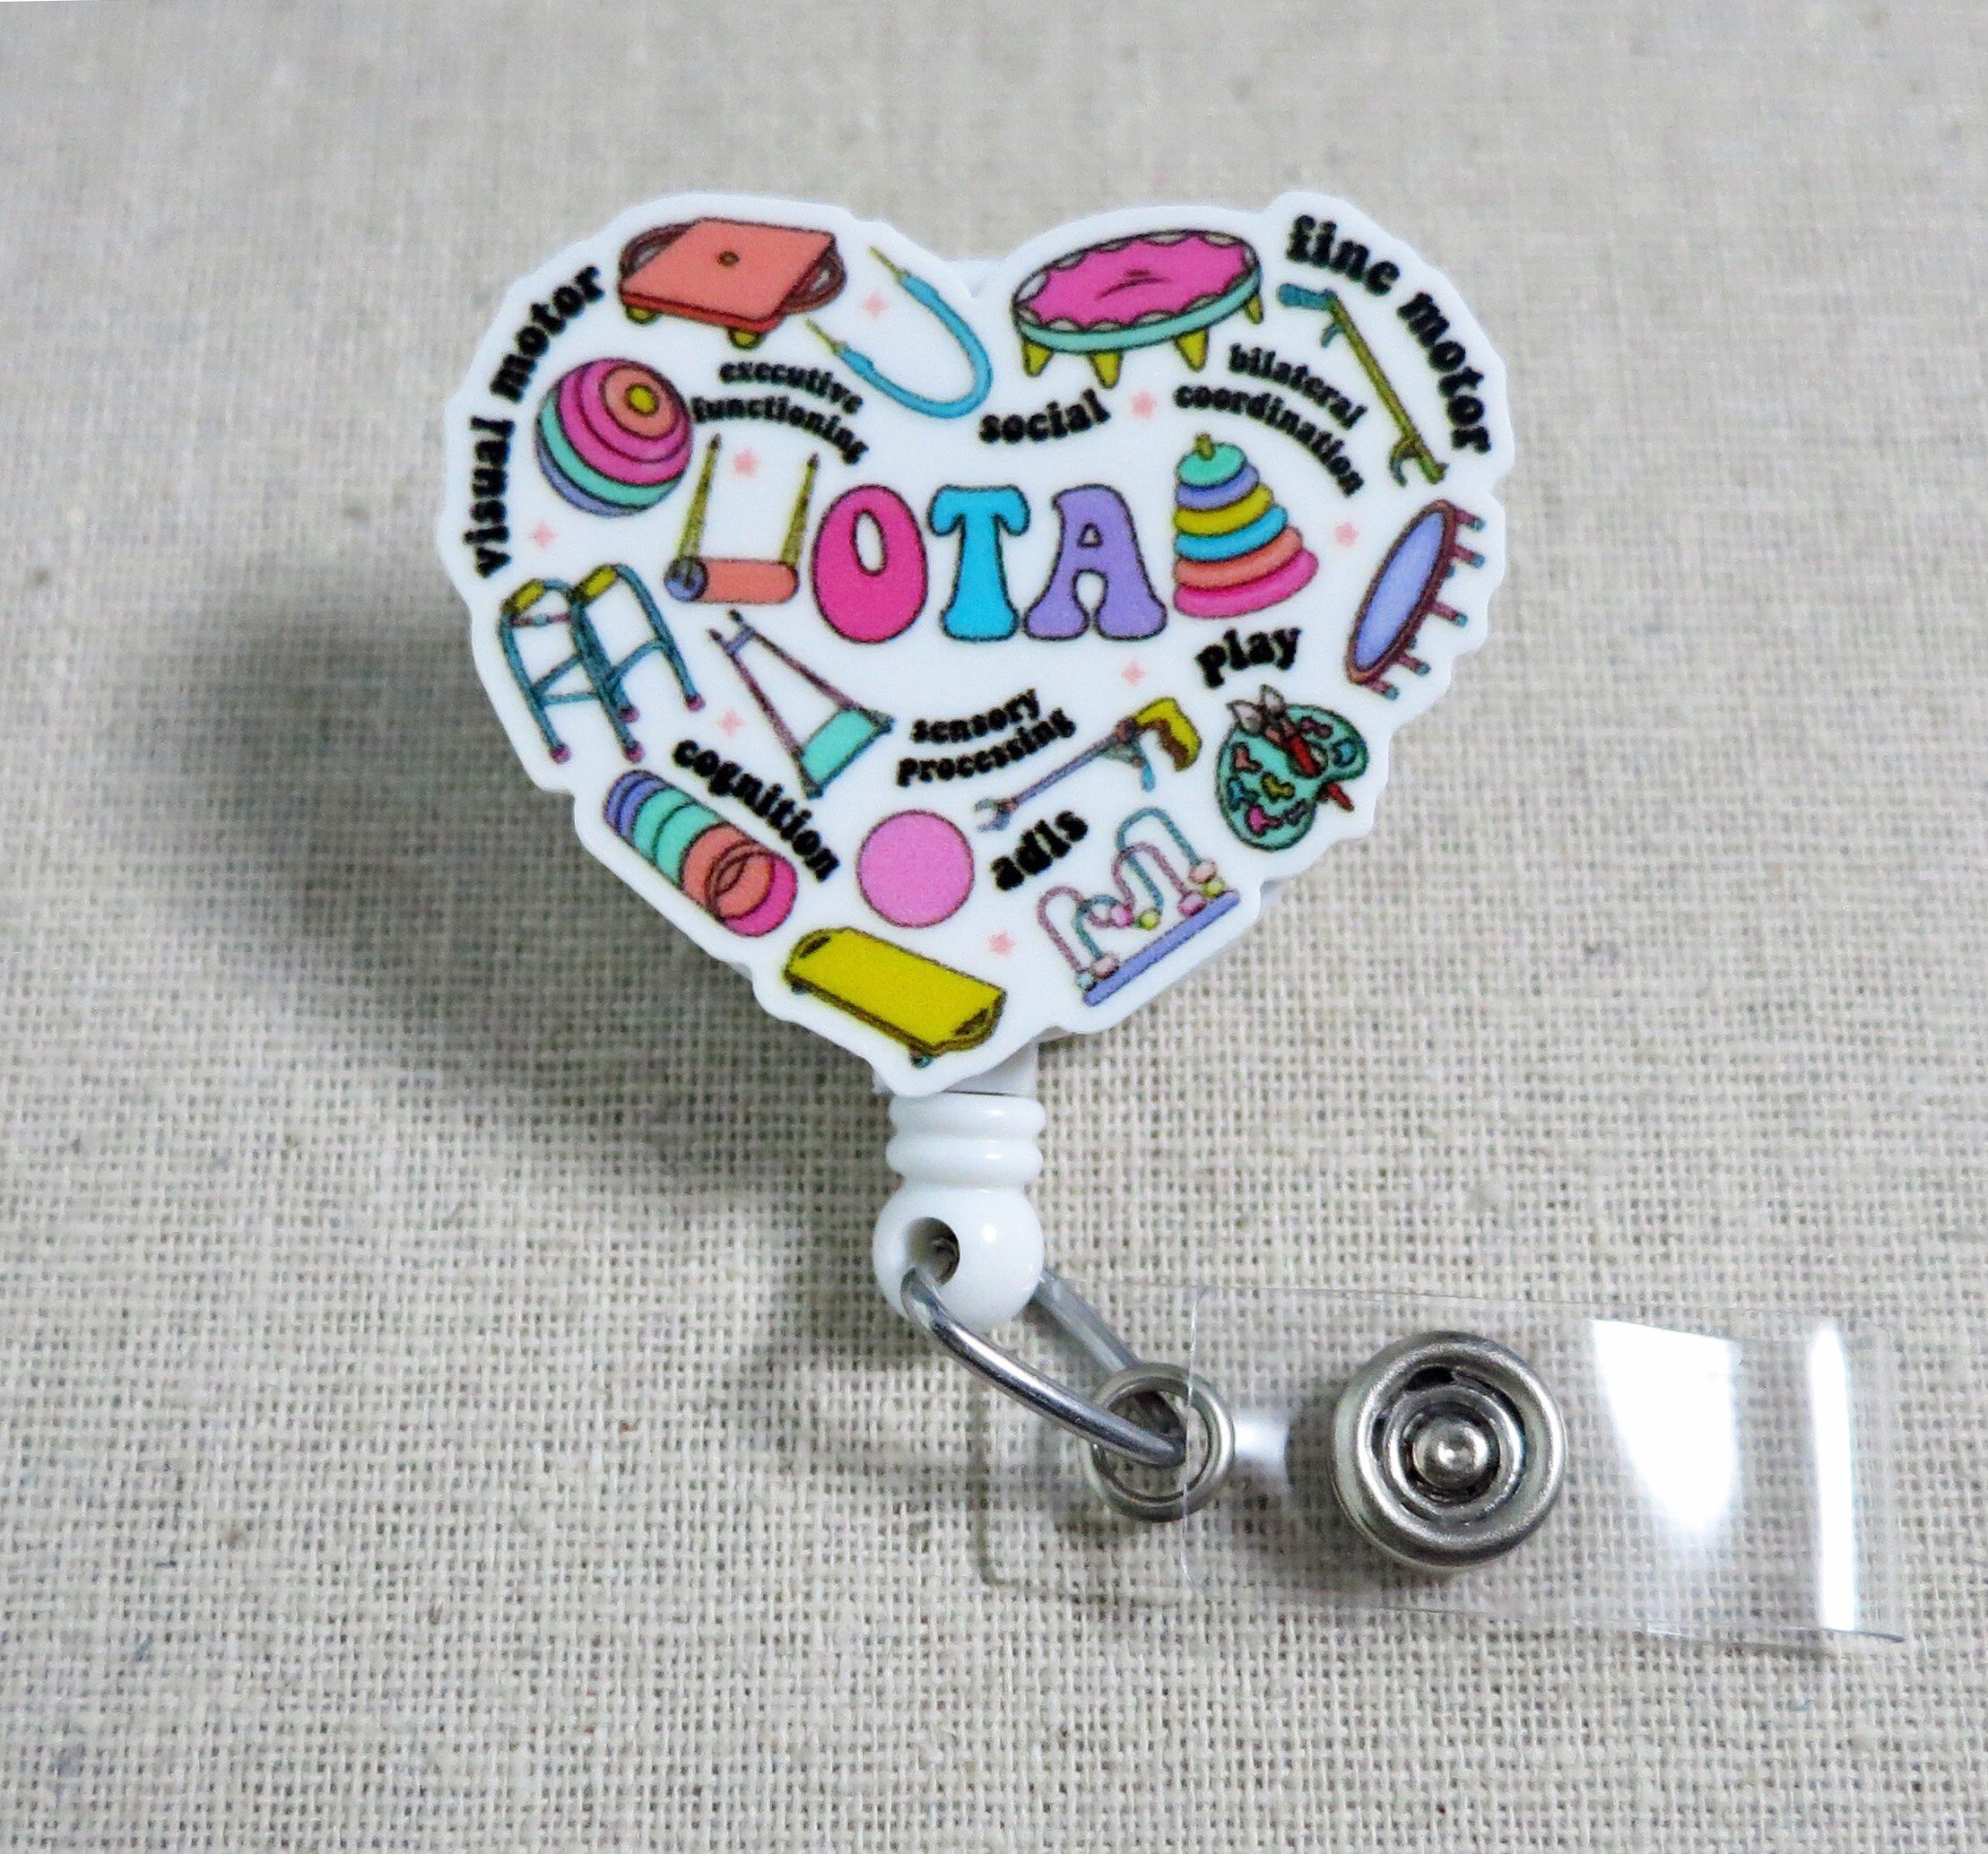 Ota Badge Reel, Occupational Therapy Assistant Badge Holder, Ota Badge ID Holder, National OT Day Gifts, Colorful Ota Badge Clip, Ota Gifts